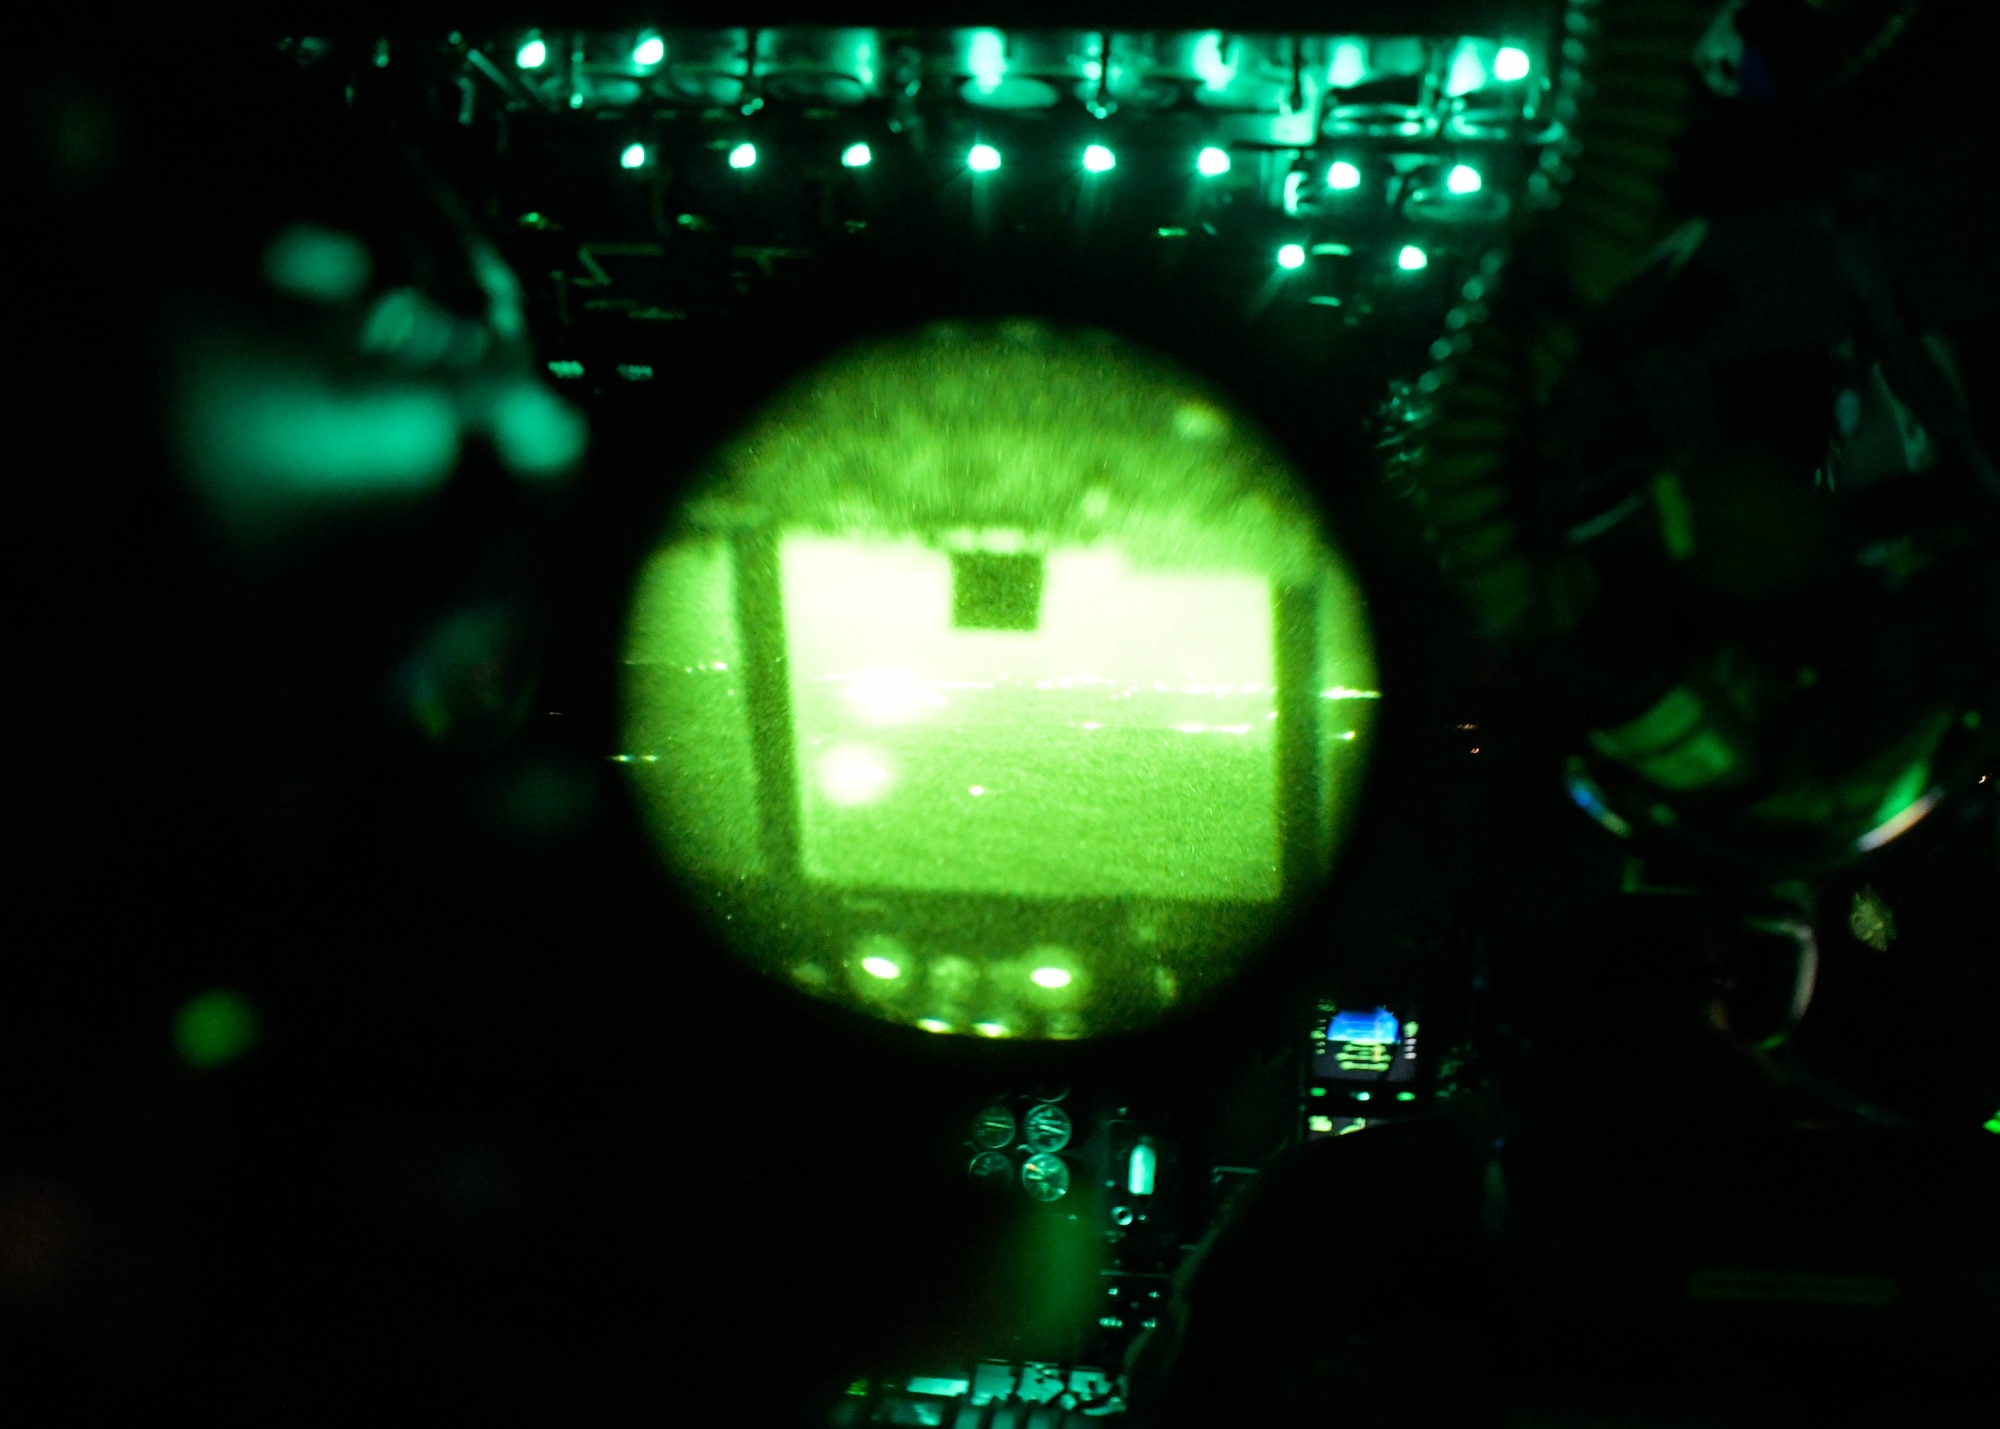 The view from a pair of night vision goggles while in the cockpit of a C-130H3 Hercules from Dobbins Air Reserve Base, Georgia, during a Night Tactical Air-Land Mission during Exercise Real Thaw 2019 at Beja Air Base, Portugal, Oct. 2, 2019. Real Thaw is a Portuguese-led large joint and combined force exercise held annually where Dobbins provided aerial support. (U.S. Air Force photo/Senior Airman Josh Kincaid)